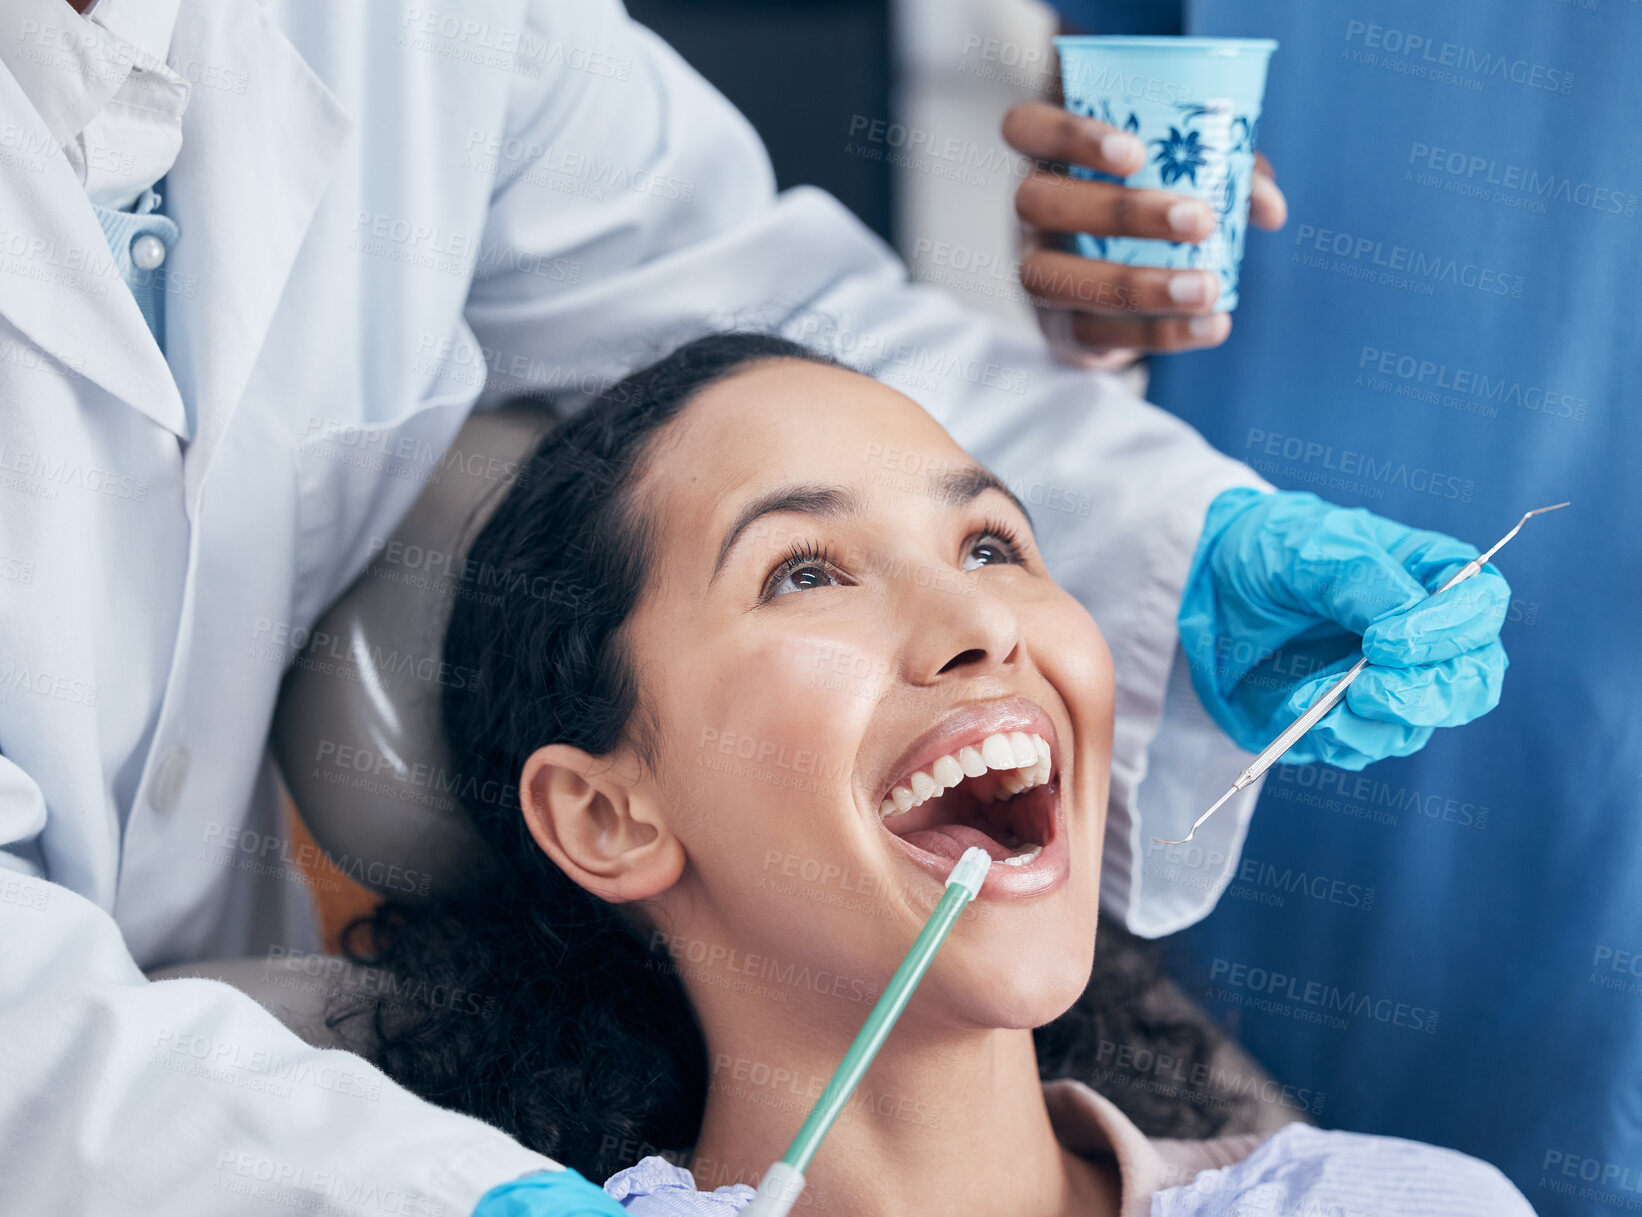 Buy stock photo Shot of a young woman having a procedure performed by her dentist